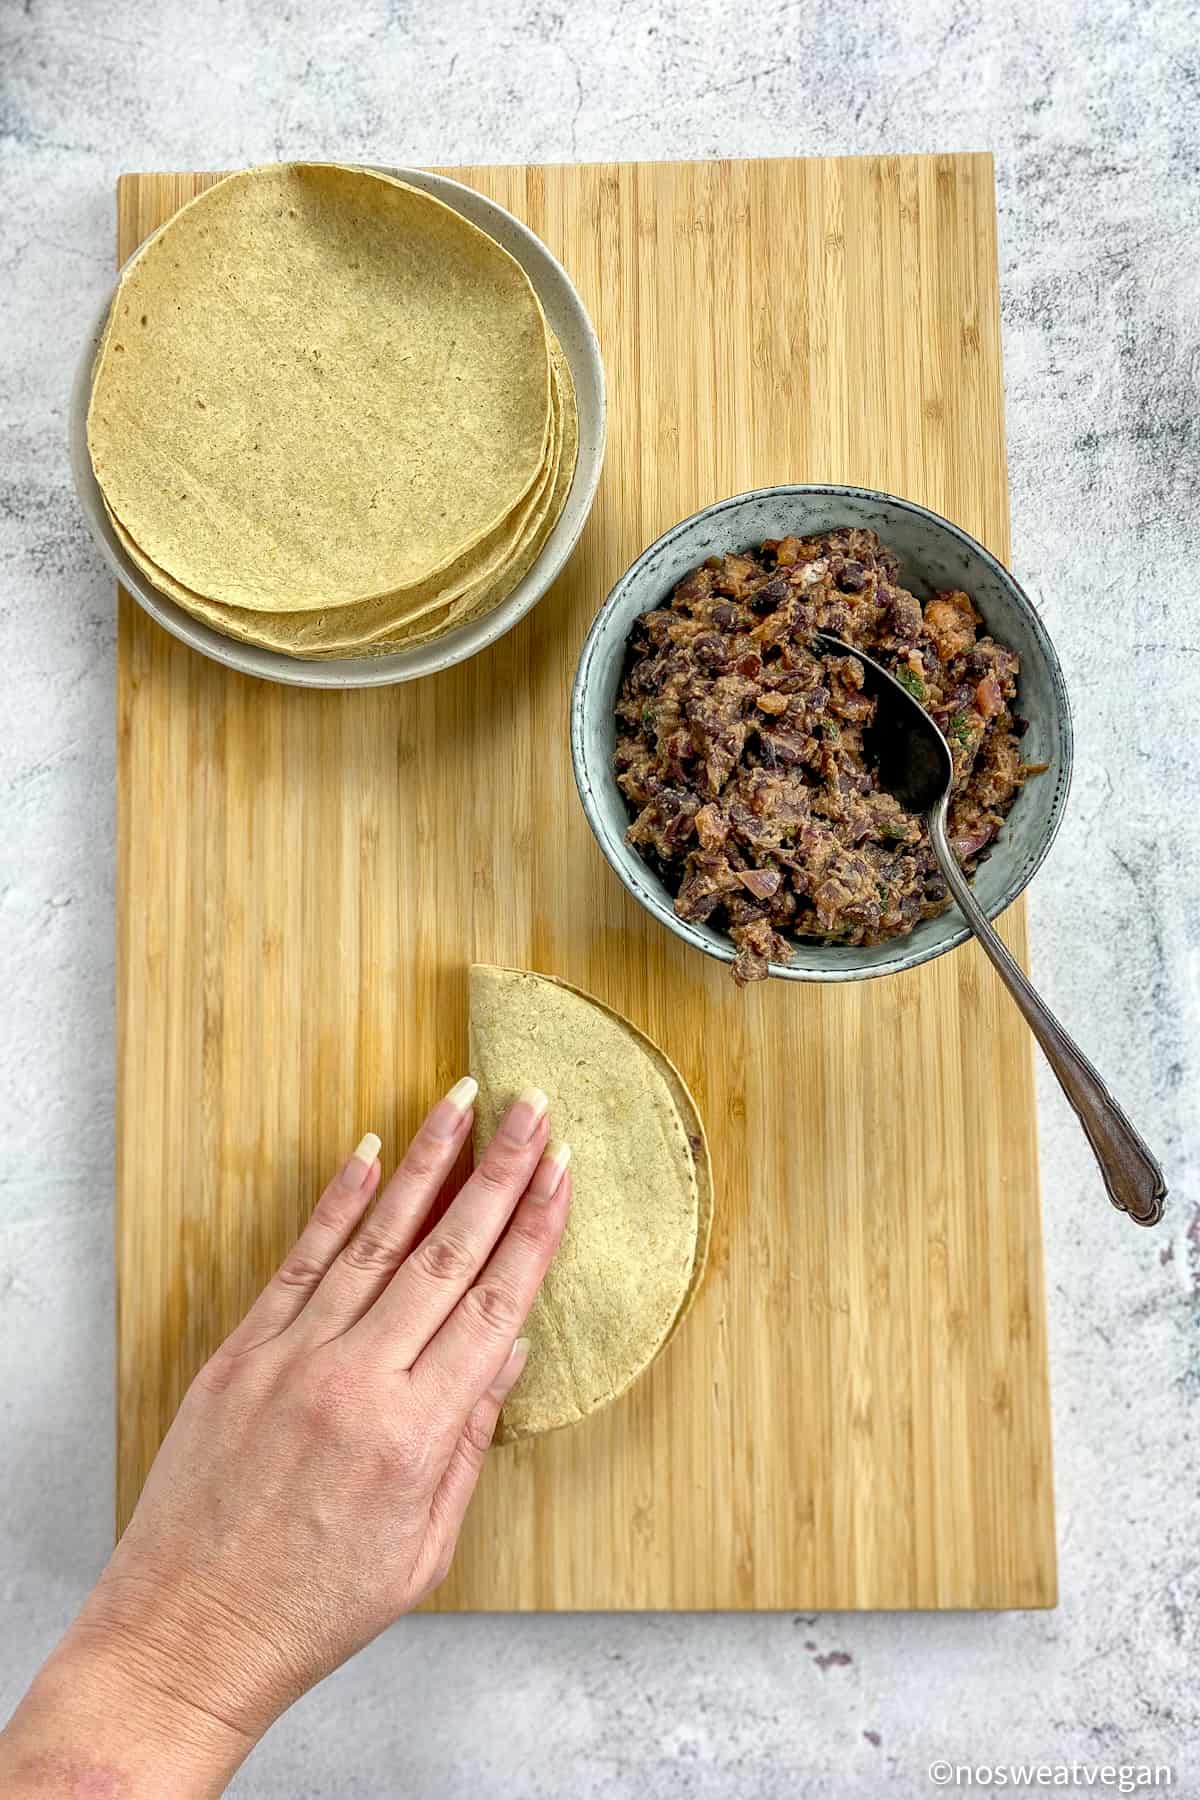 Tortillas, bean mixture and a taco with a hand pressing it down.